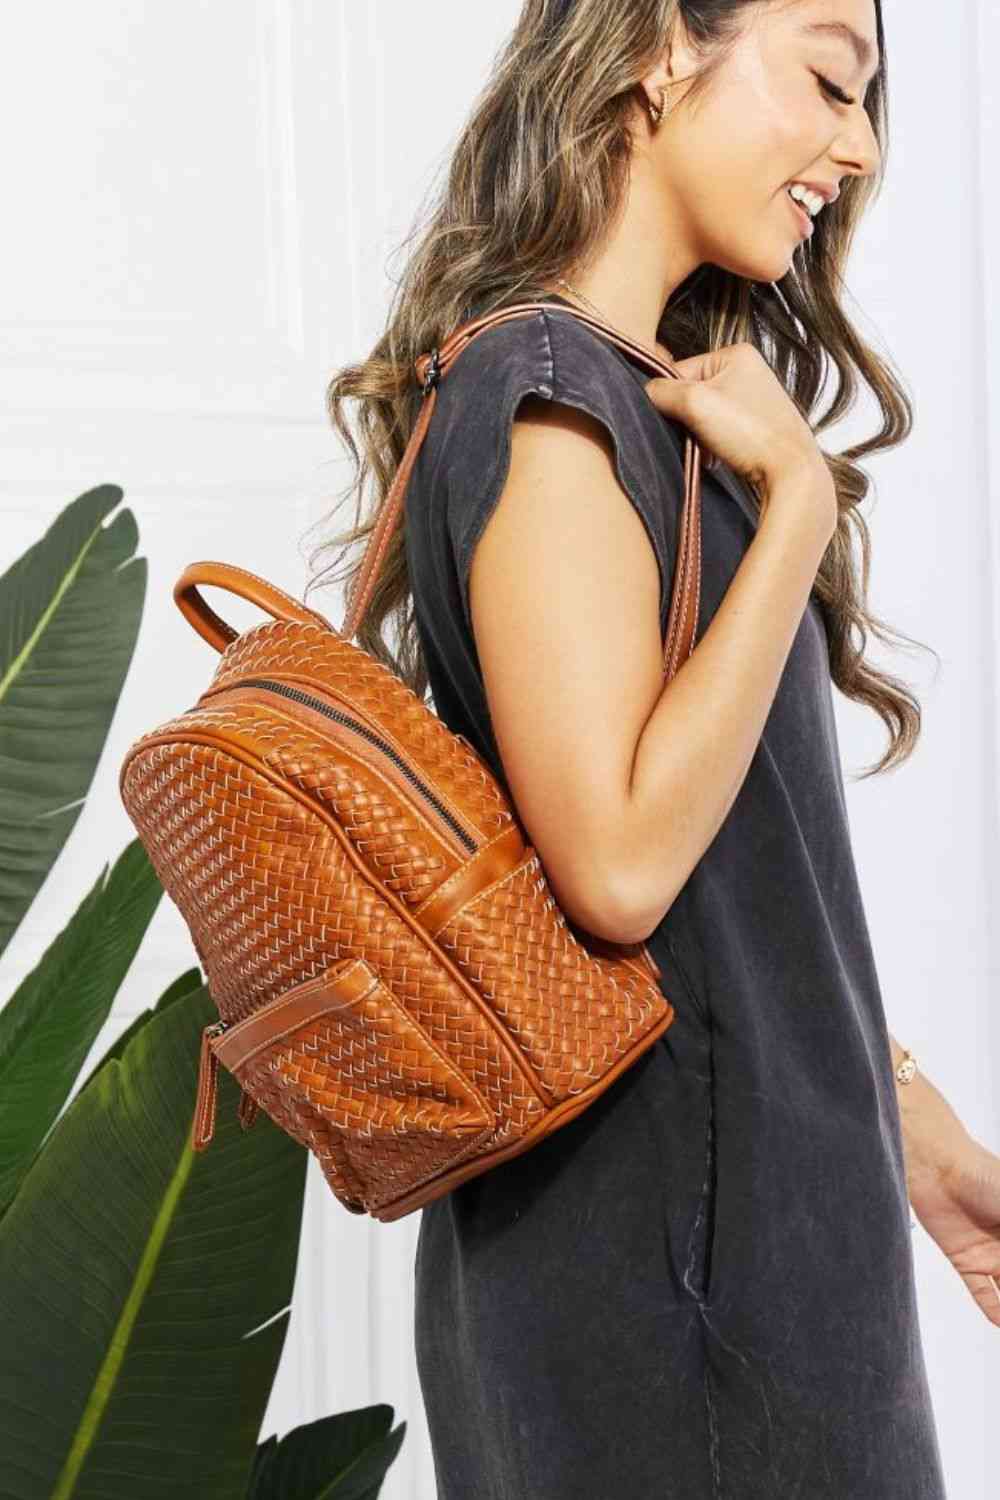 SHOMICO Certainly Chic Faux Leather Woven Women Backpack